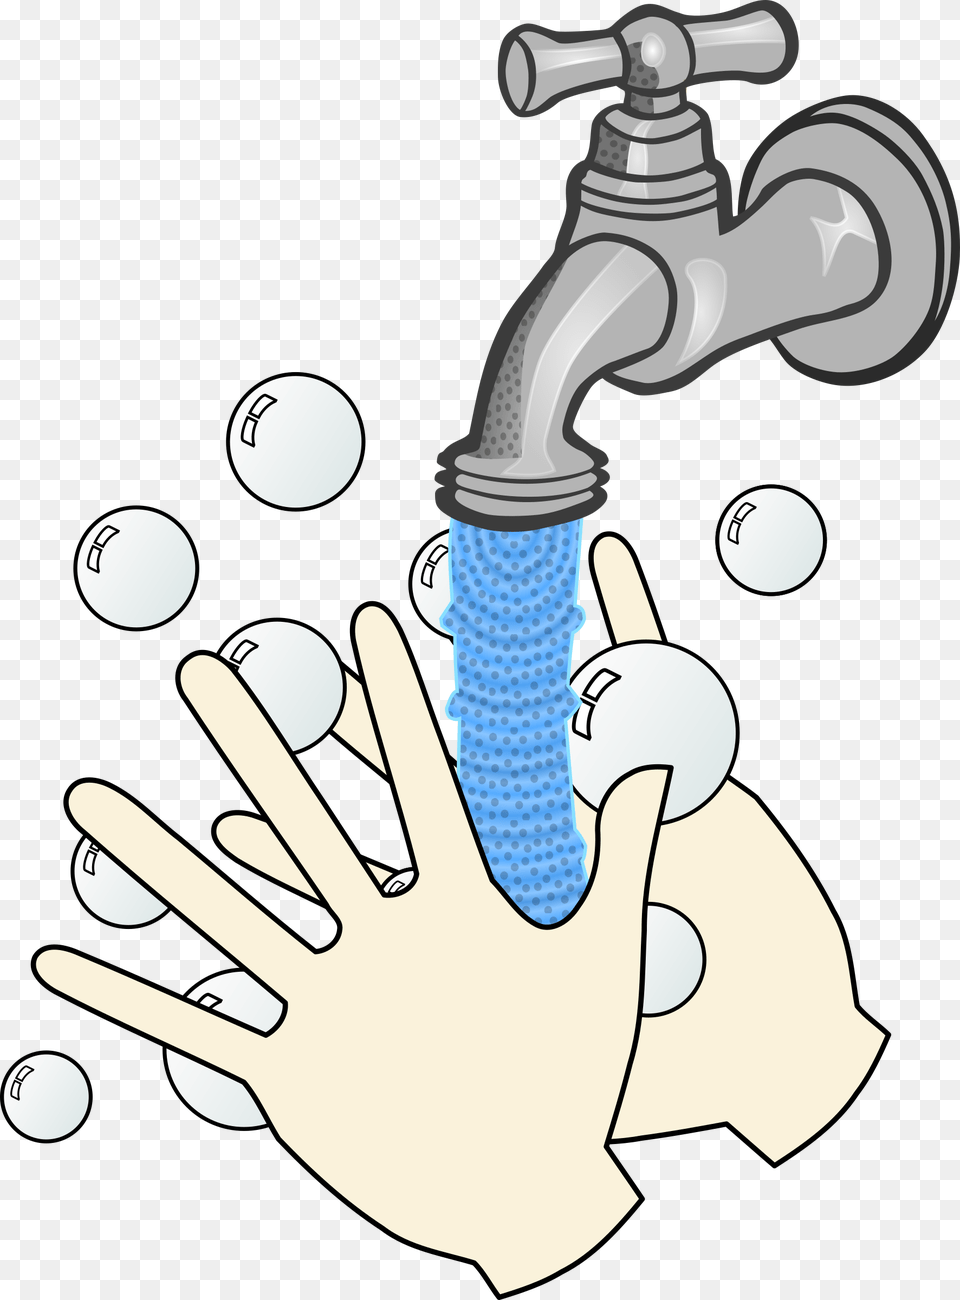 Running Water Wash Your Hands With Soap And Water, Tap, Smoke Pipe Png Image